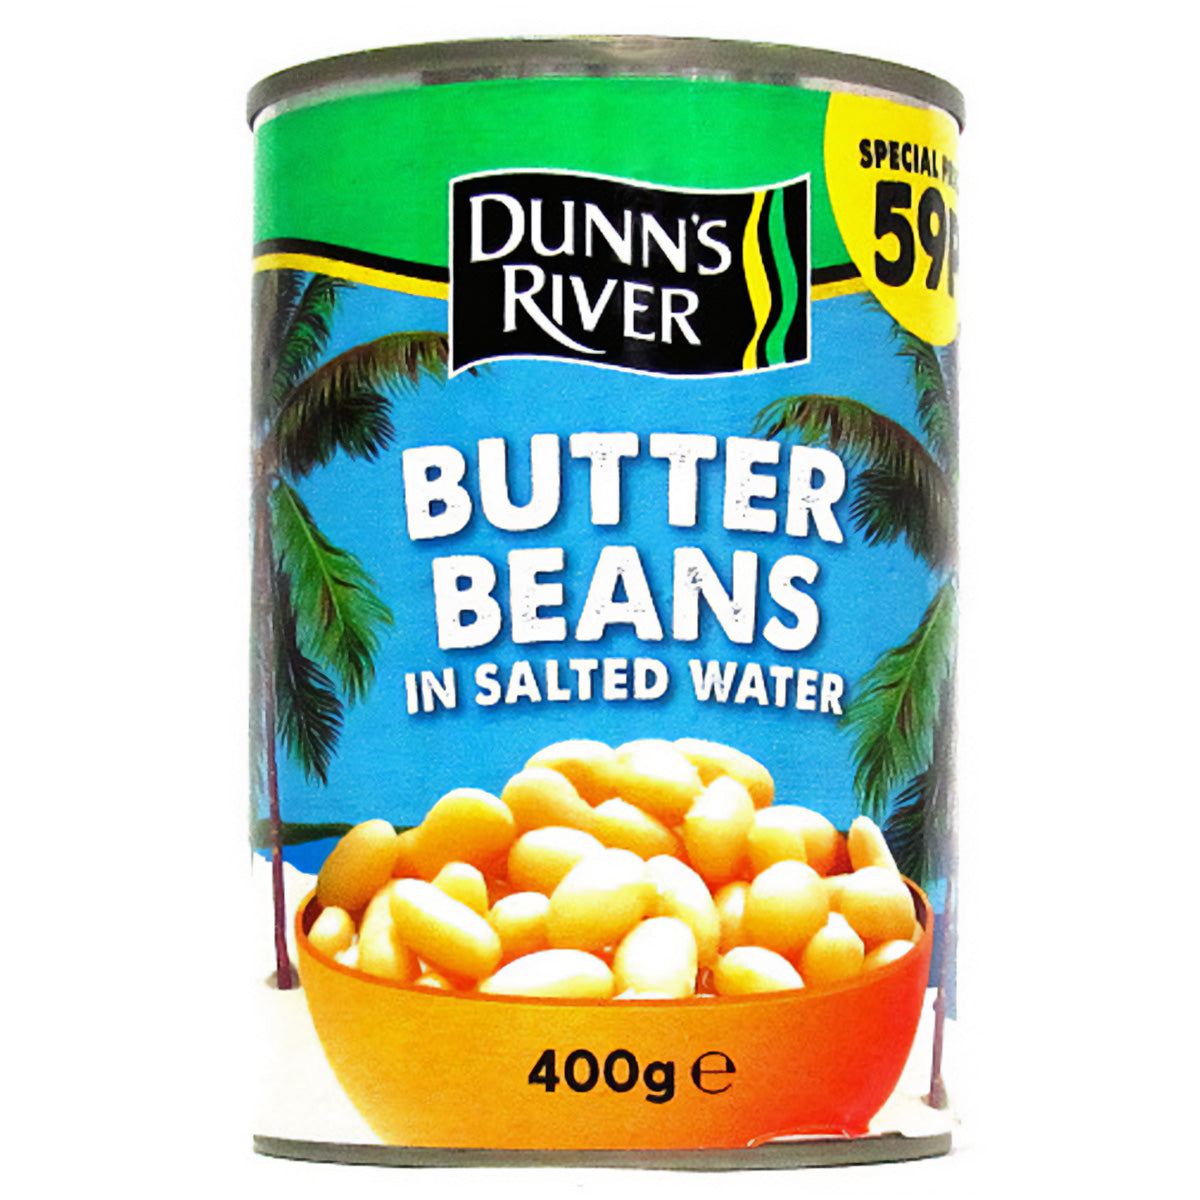 Dunn's River - Butter Beans in Salted Water - 400g - Continental Food Store